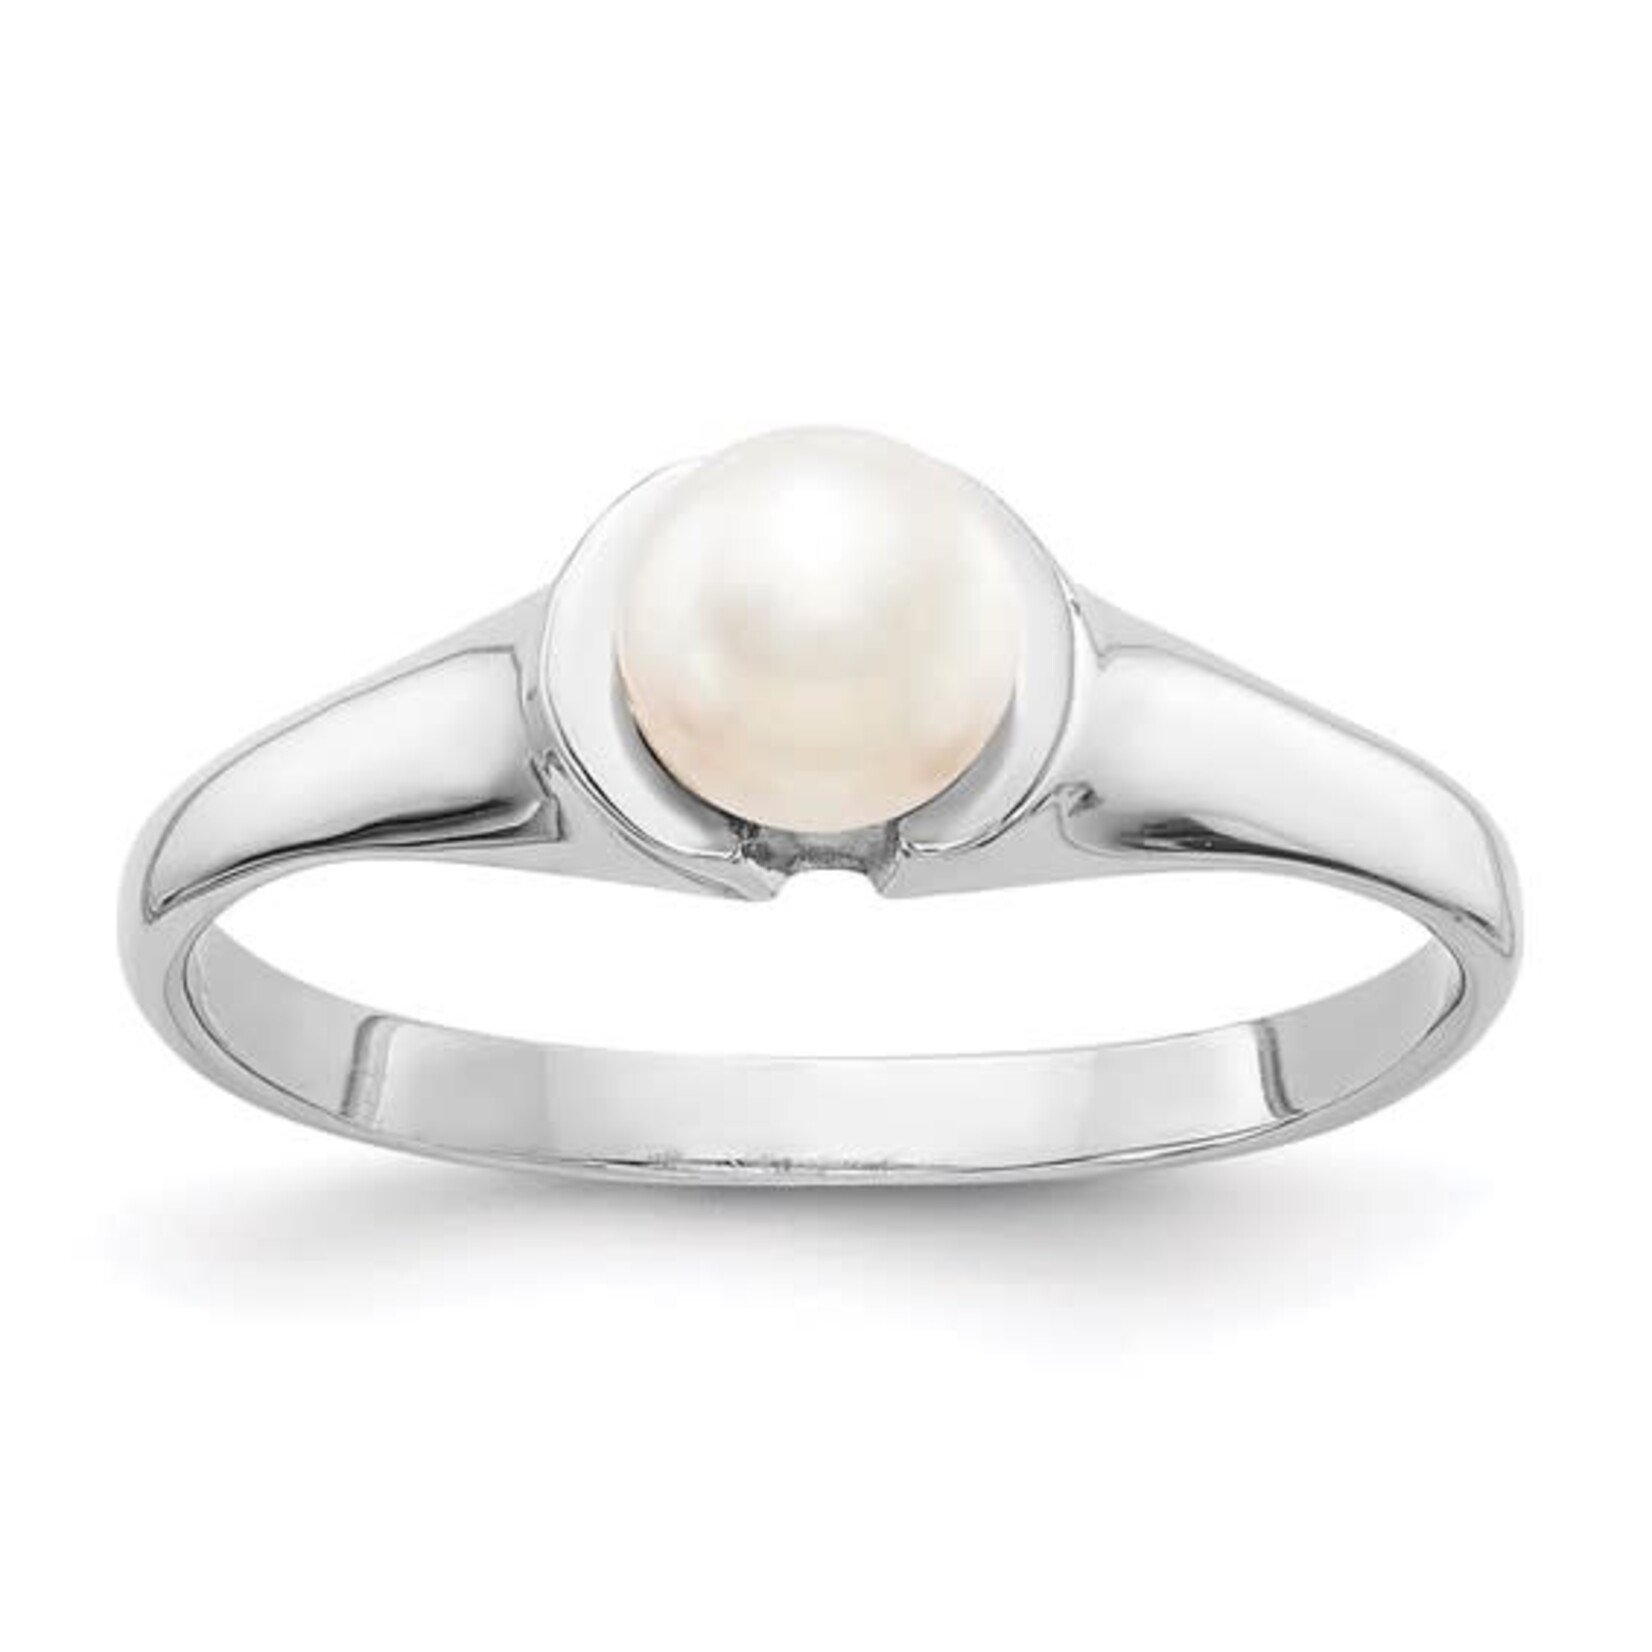 14k White Gold 5mm Fresh Water Cultured Pearl Ring